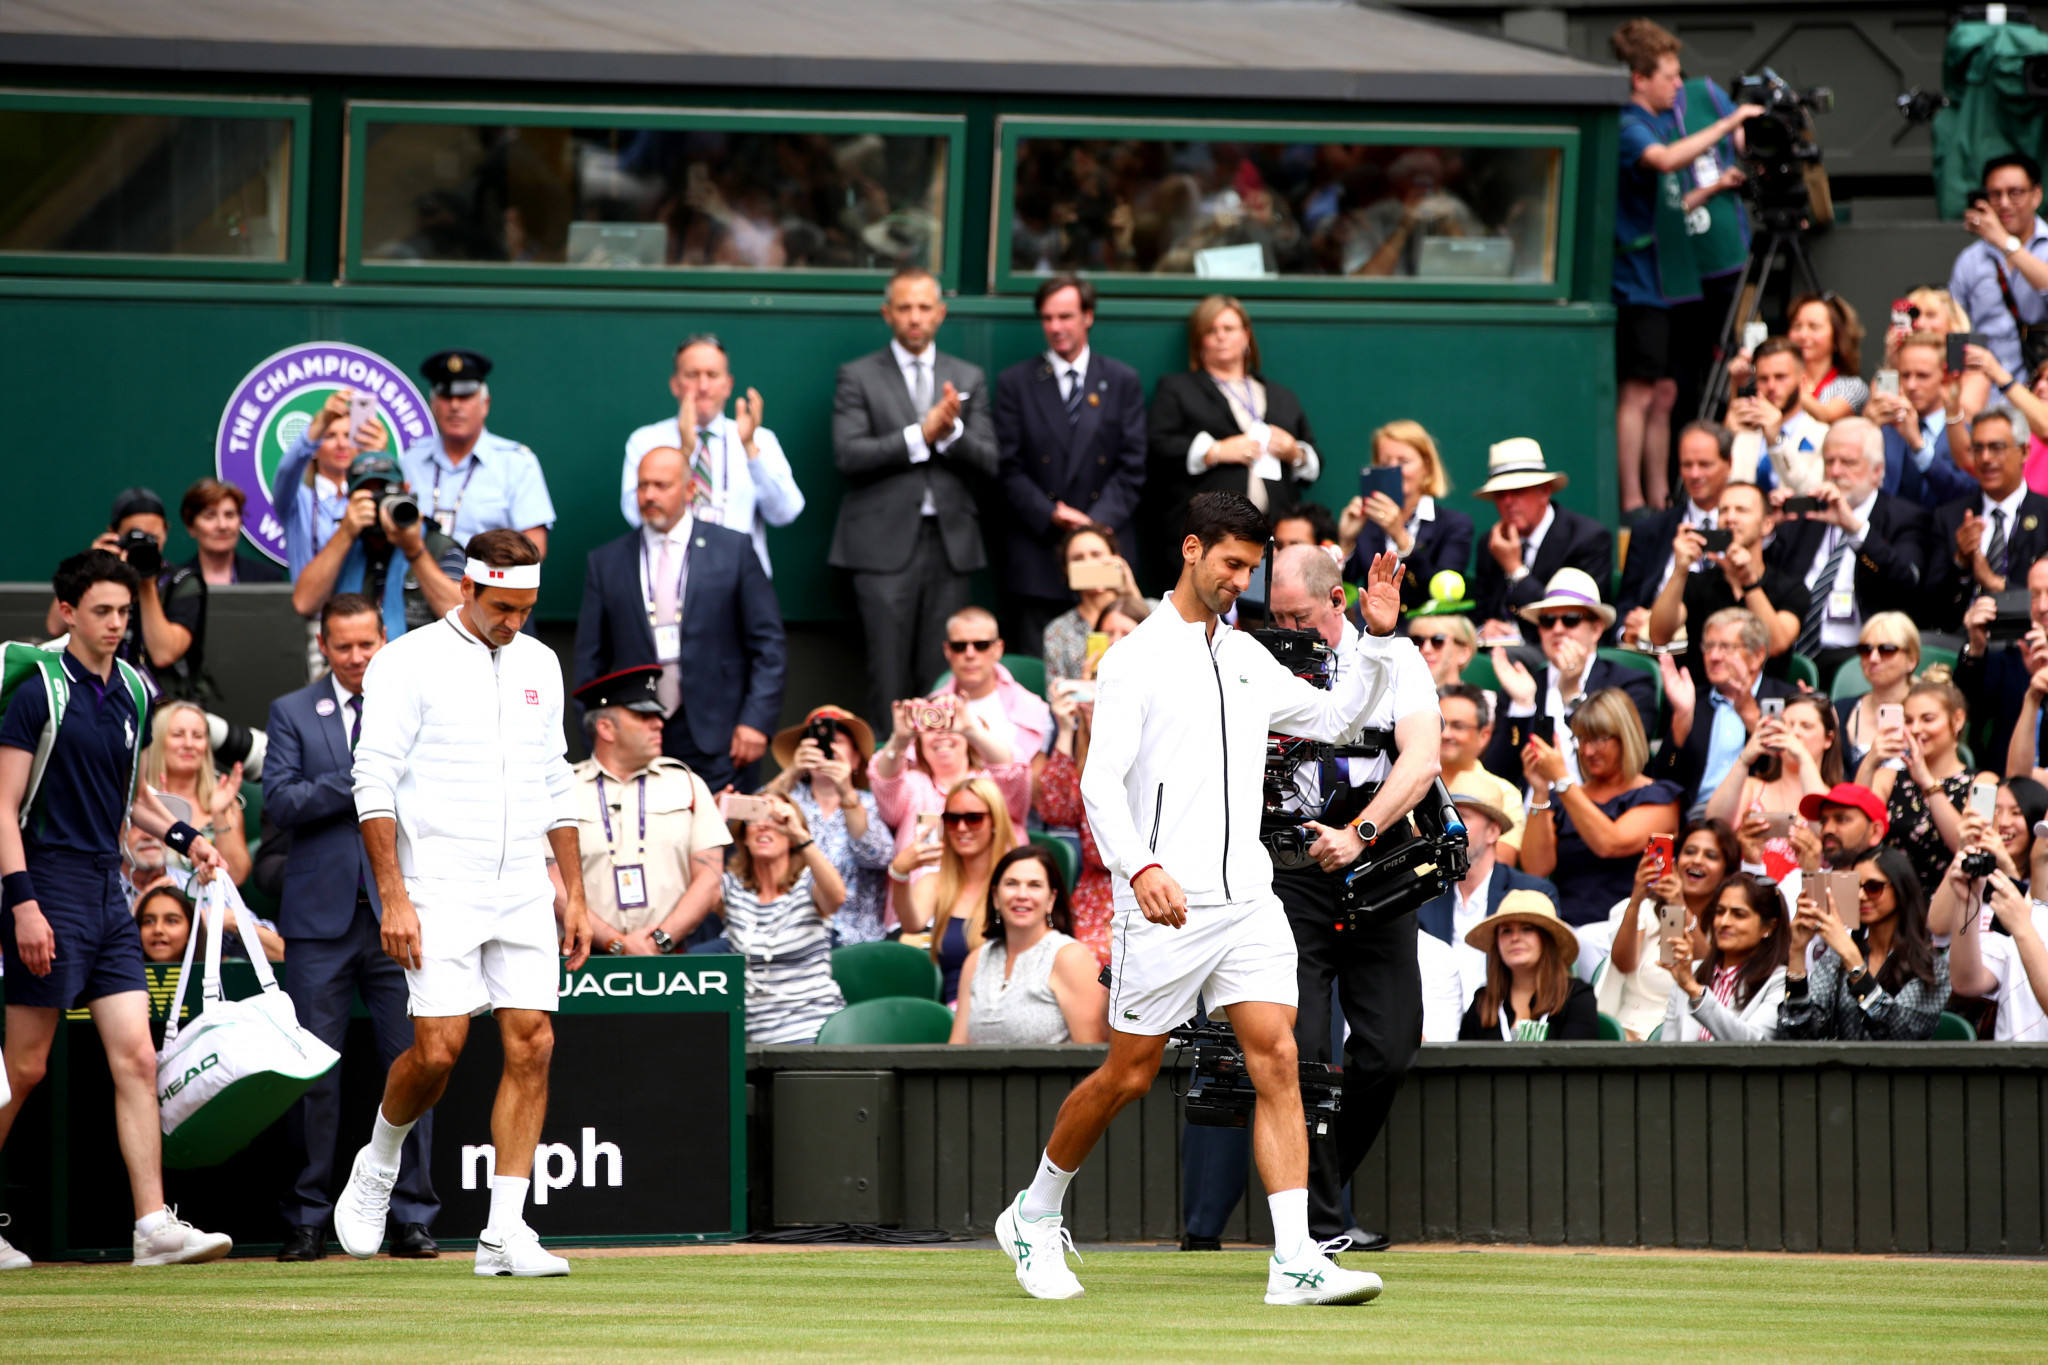 The scene was set for a Centre Court classic as Djokovic and Federer entered the arena ©Getty Images